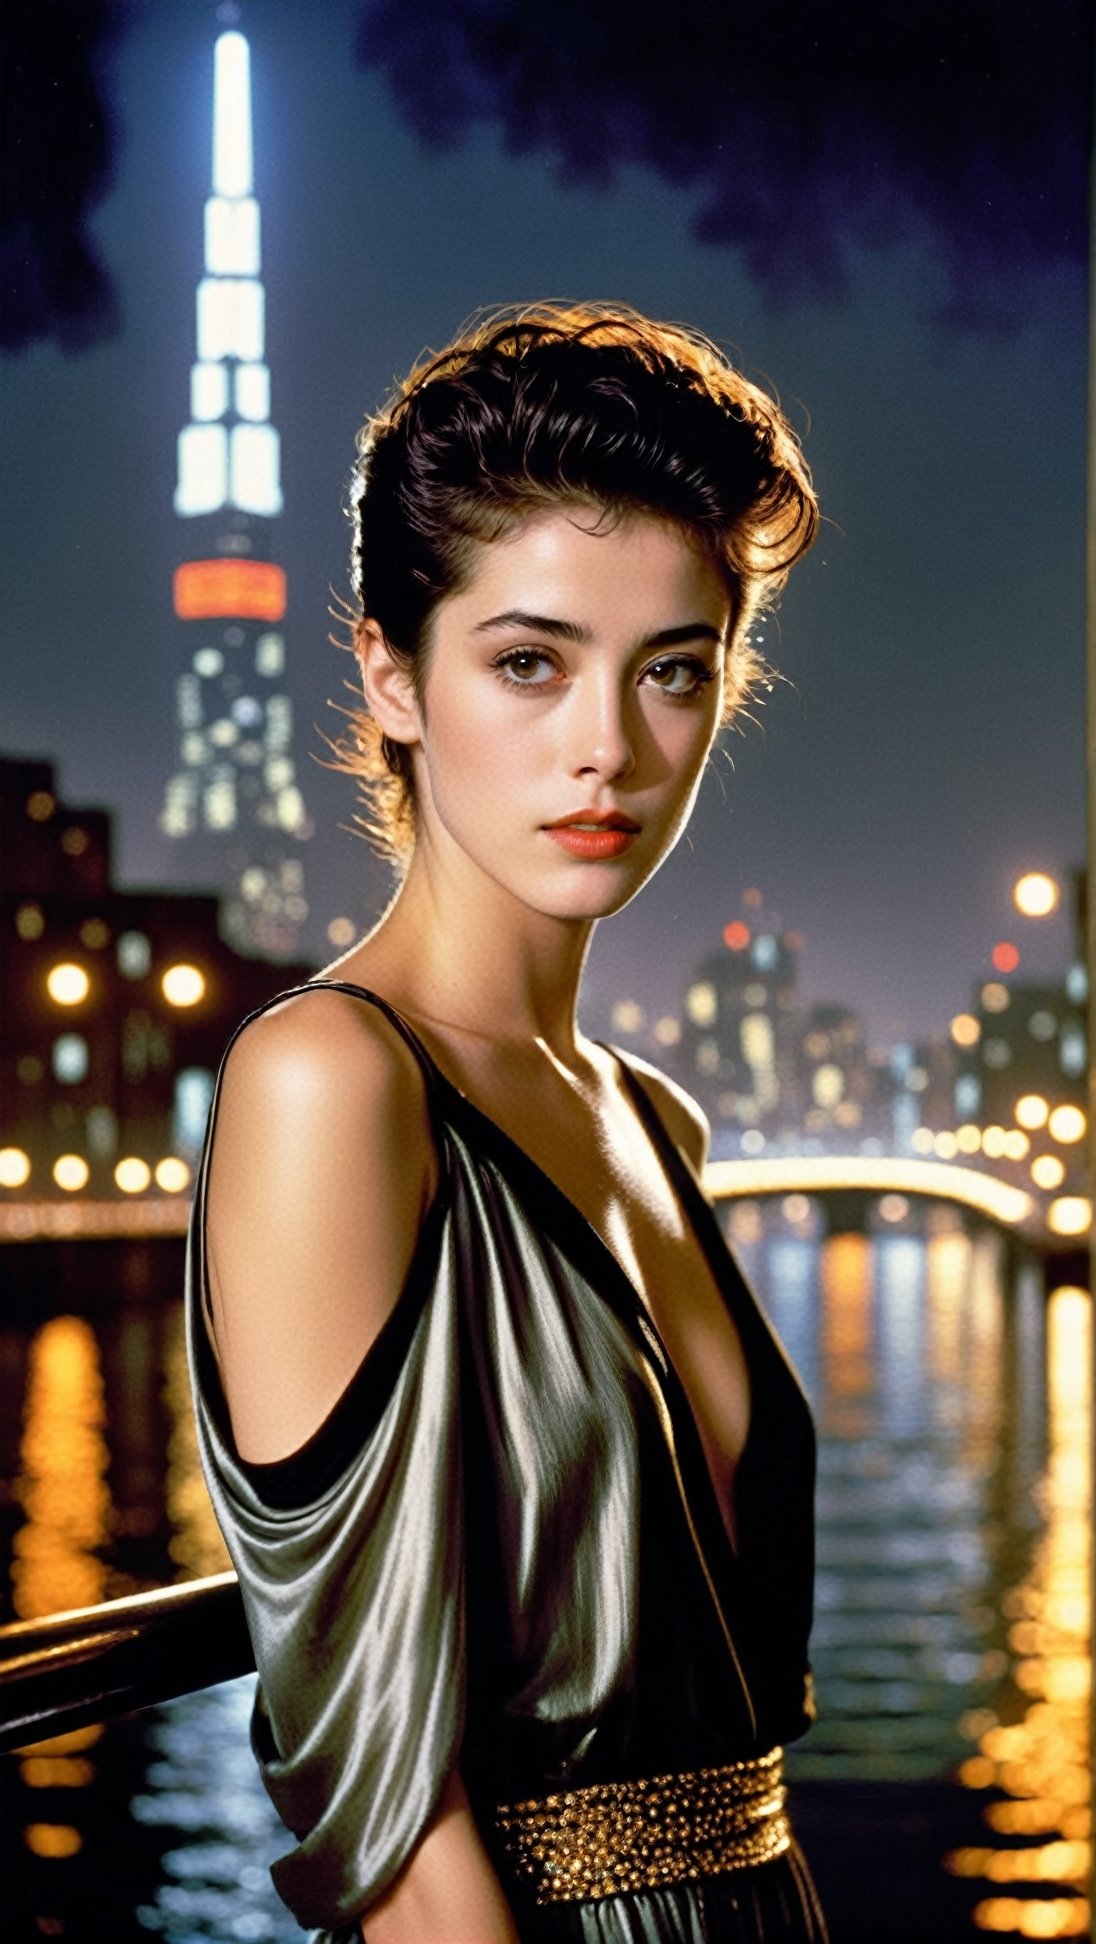 Here's a prompt for generating an image:

A 20-year-old girl \(Sean Young\) stands solo on a bridge at night, her gaze directed straight into the camera lens. Inspired by Sean Young's iconic pose in Blade Runner. Her facial features are hyper-realistically rendered, showcasing perfect skin tone and clear definition. The model body is toned and athletic, with a striking female form. Against the blurred backdrop of a beautiful River, the cityscape twinkles with lights, tower silhouettes, and bustling activity.

The composition is masterfully crafted to follow the rule of thirds (1.3), placing the subject off-center for a visually appealing shot. The studio lighting creates a dramatic chiaroscuro effect, accentuating the girl's features and adding depth to the scene.

Image specifications: 32k resolution, UHD quality, perfect focus, high contrast, HDR, hyper-detailed, intricate details, ultra-realistic, and award-winning photography. Kodachrome 800 film-inspired texture adds an extra layer of authenticity. Created by a collective of renowned artists Antonio Lopez, Diego Koi, Karol Bak, and Hayao Miyazaki.